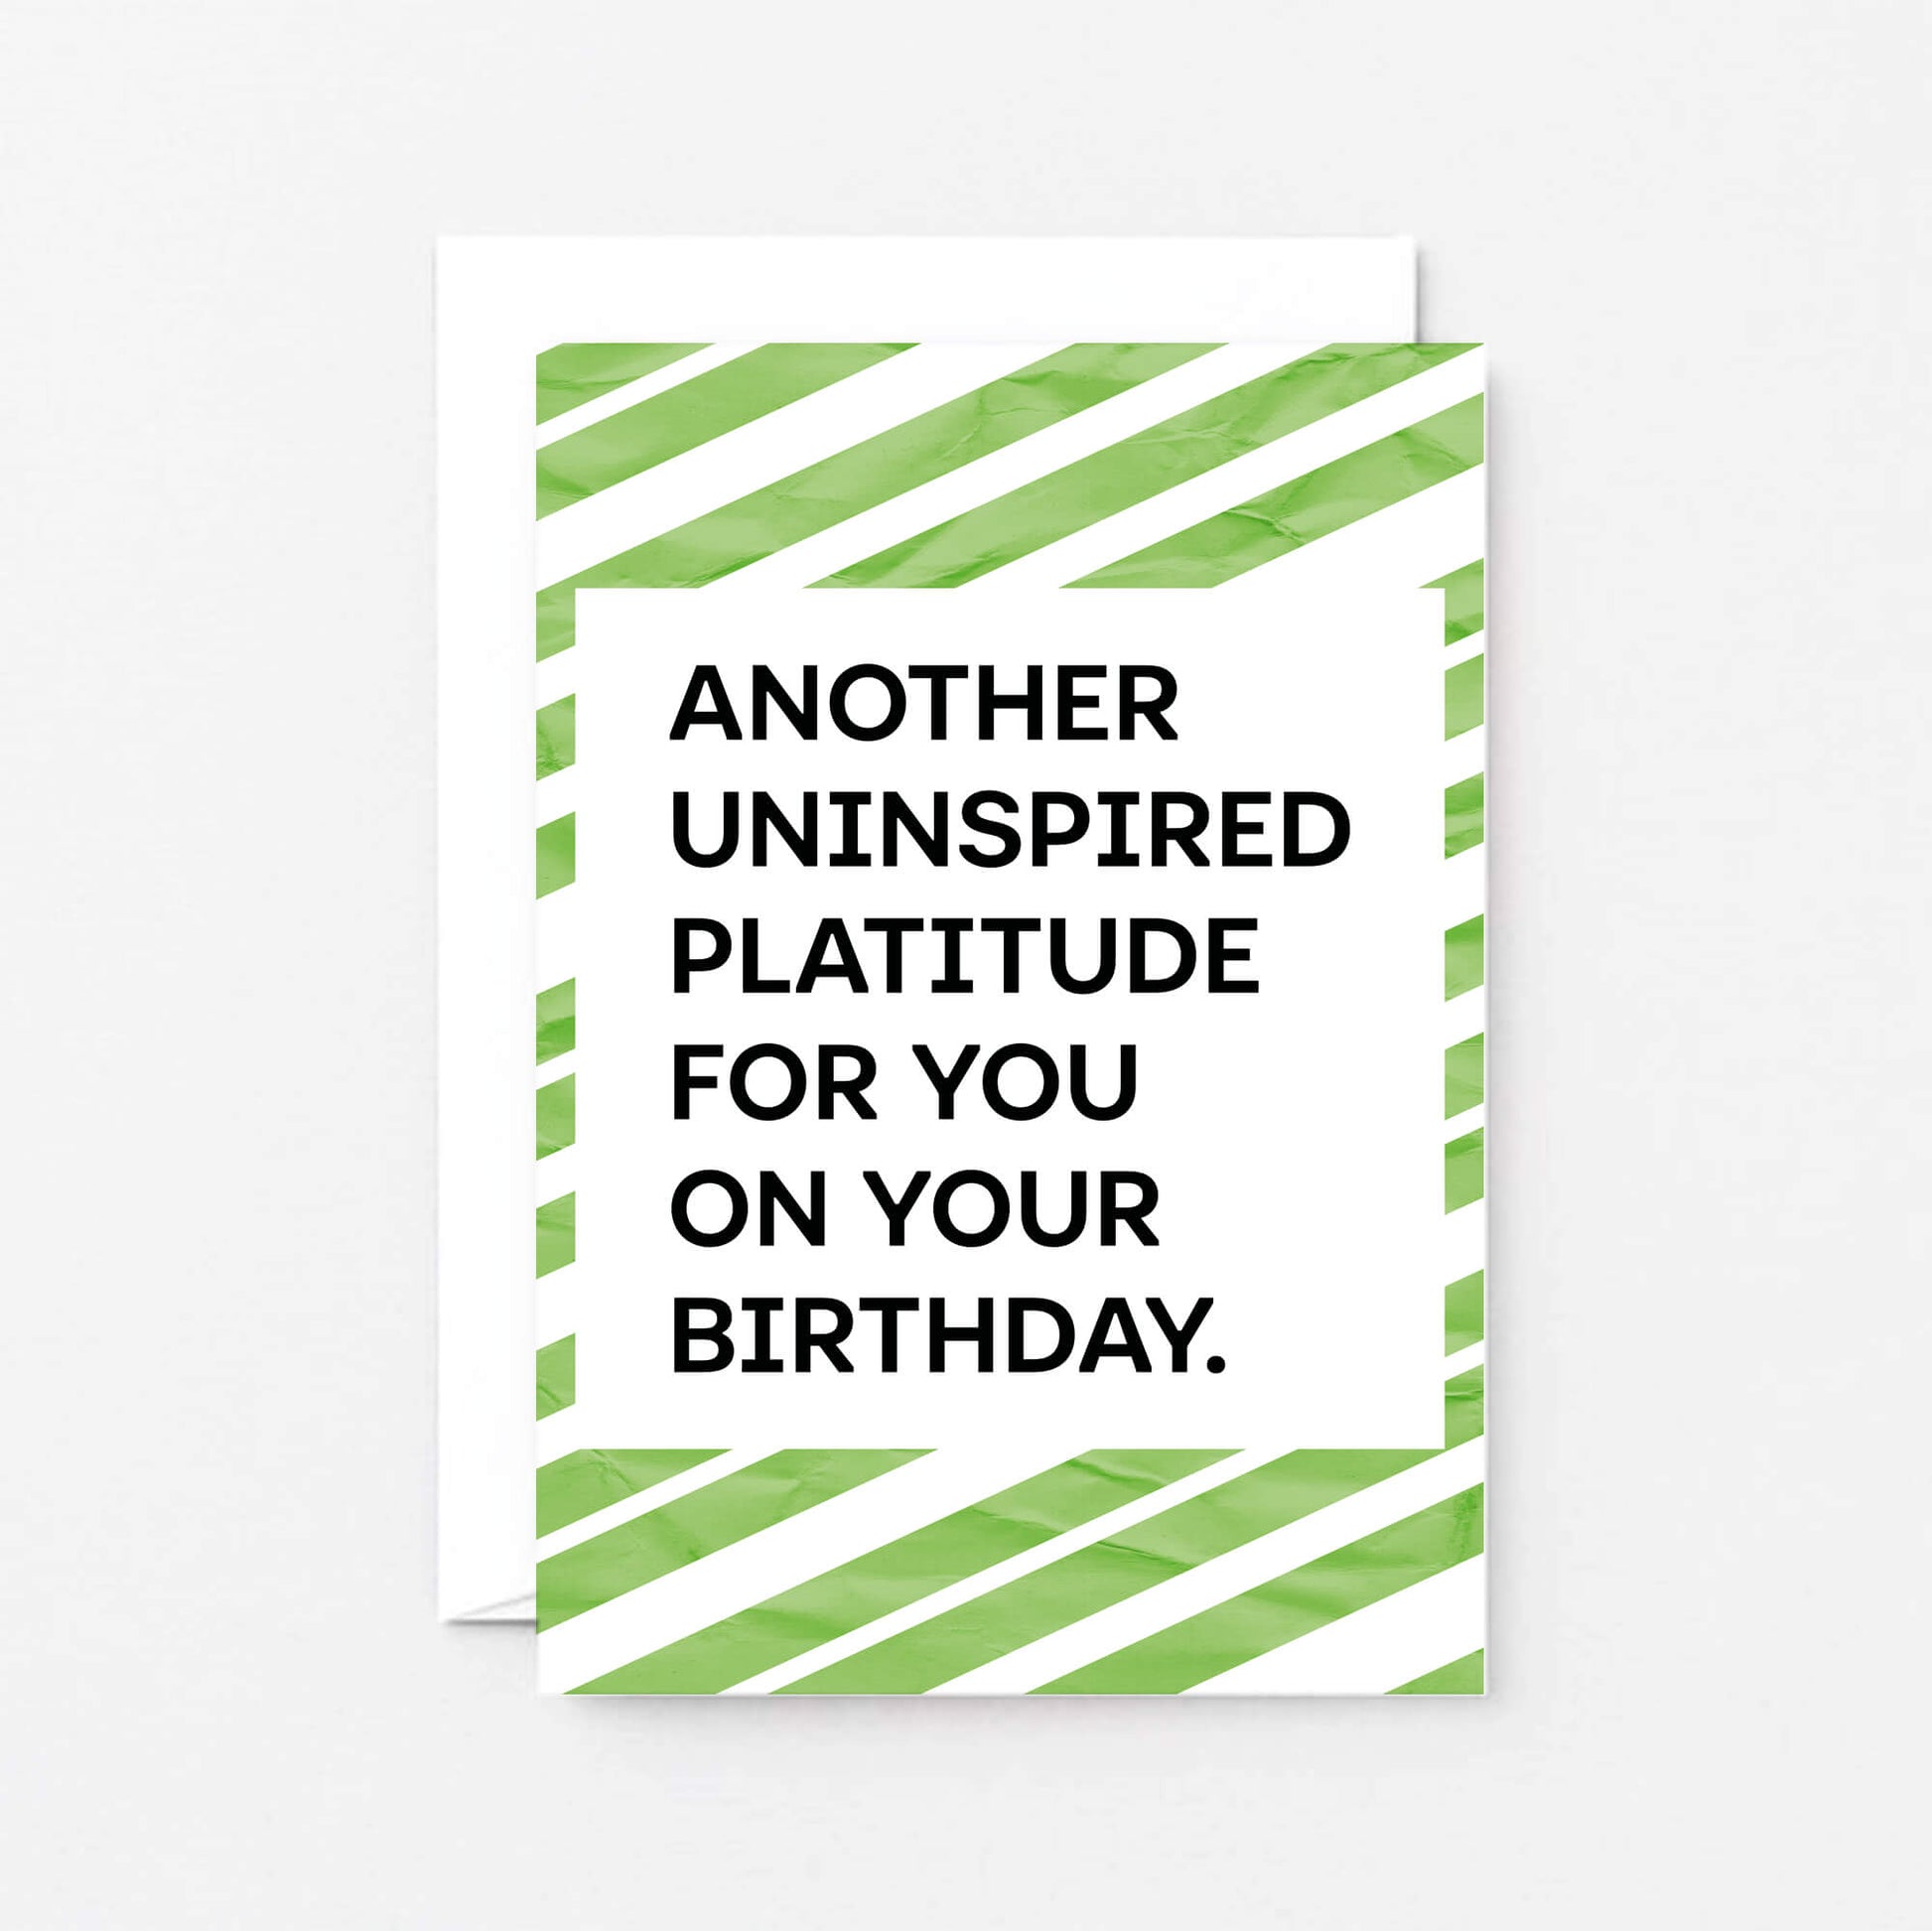 Birthday Card by SixElevenCreations. Card reads Another uninspired platitude for you on your birthday. Product code SE2302A6